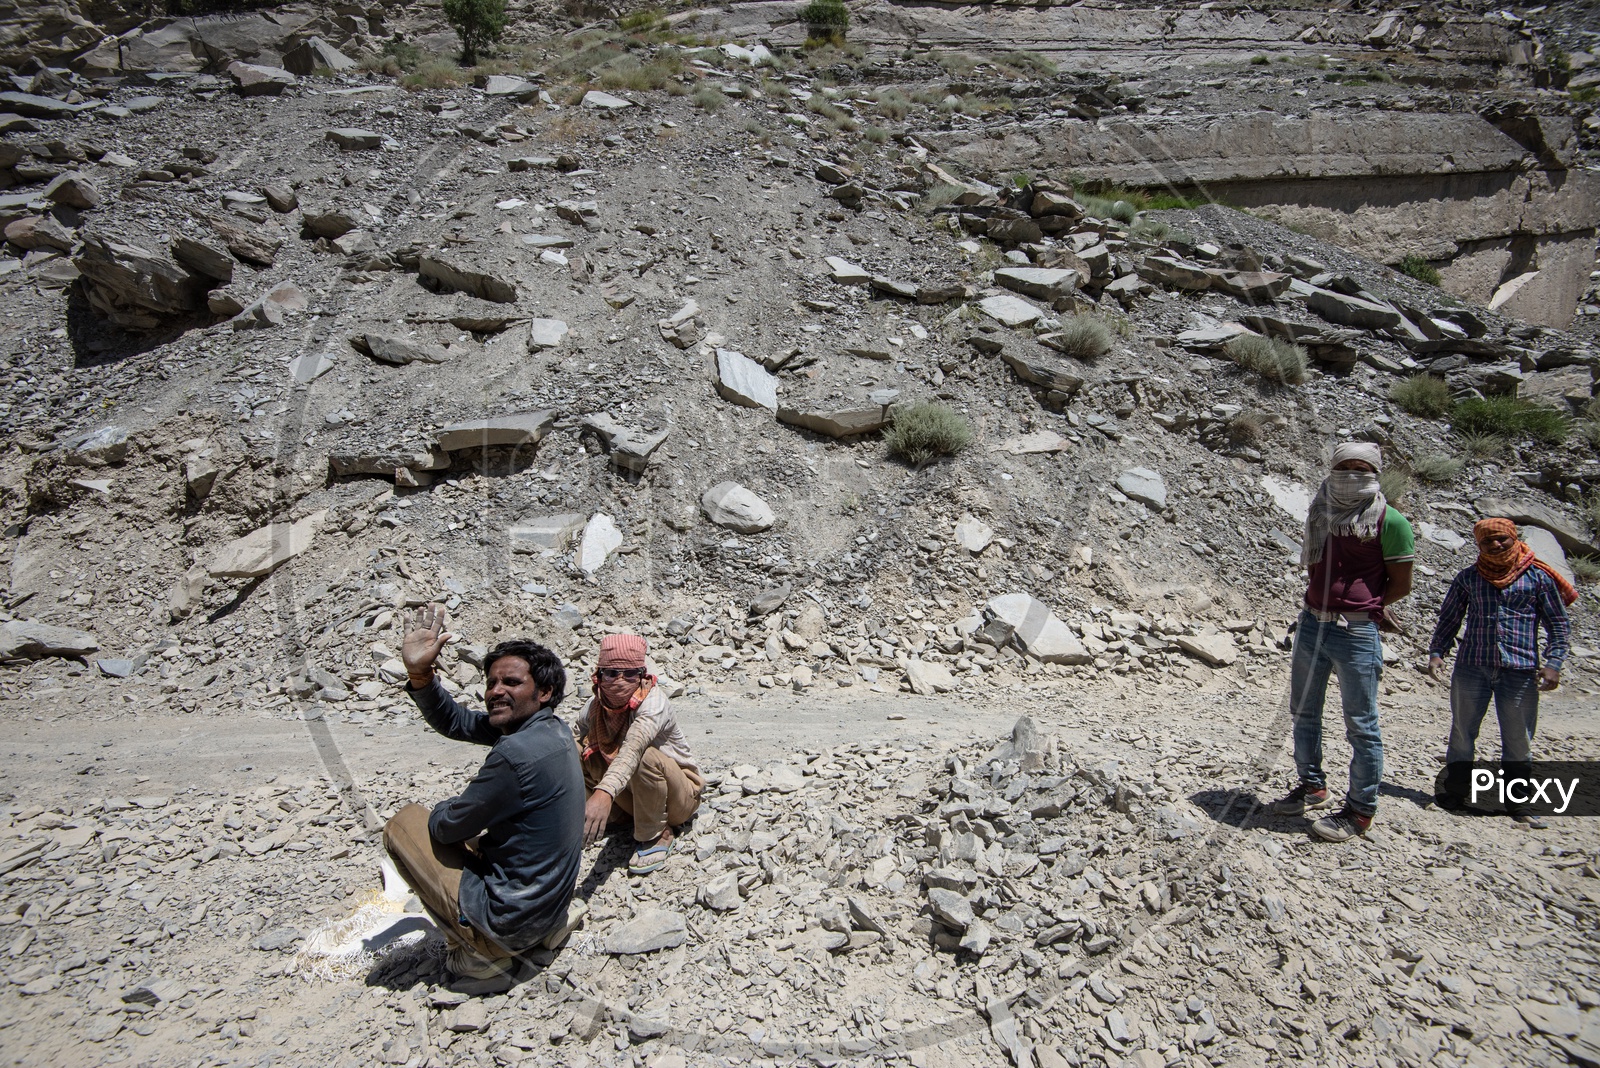 People at work in Spiti Valley